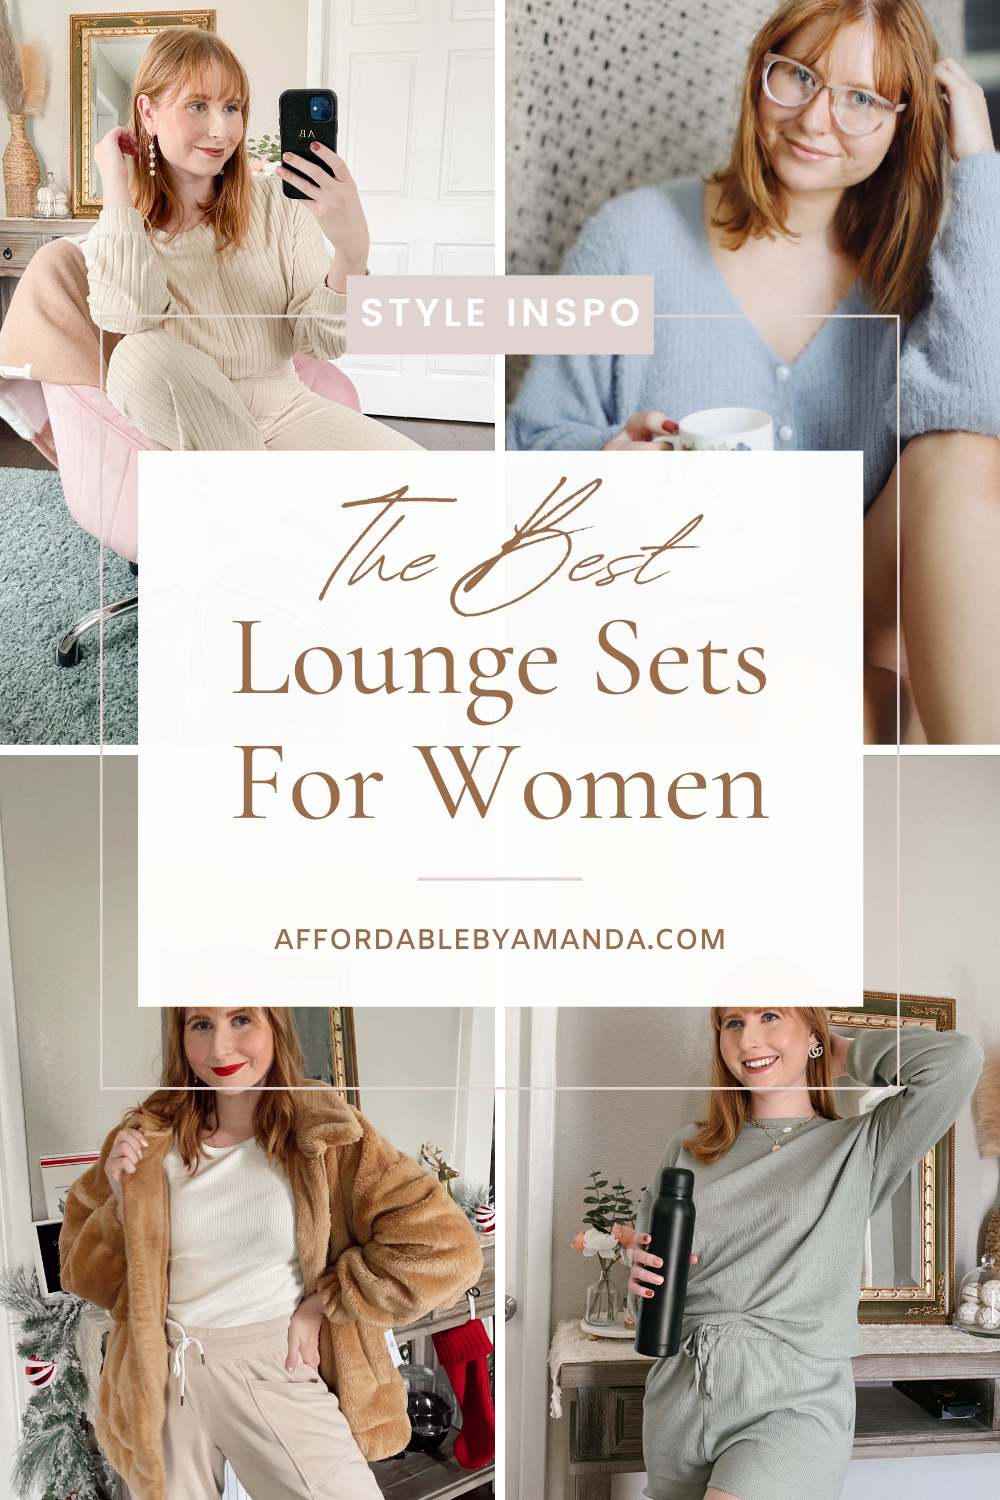 Cute Comfy Lounge Clothes | Comfortable Loungewear | Cute Loungewear | The Best Lounge Sets for Women | Affordable by Amanda